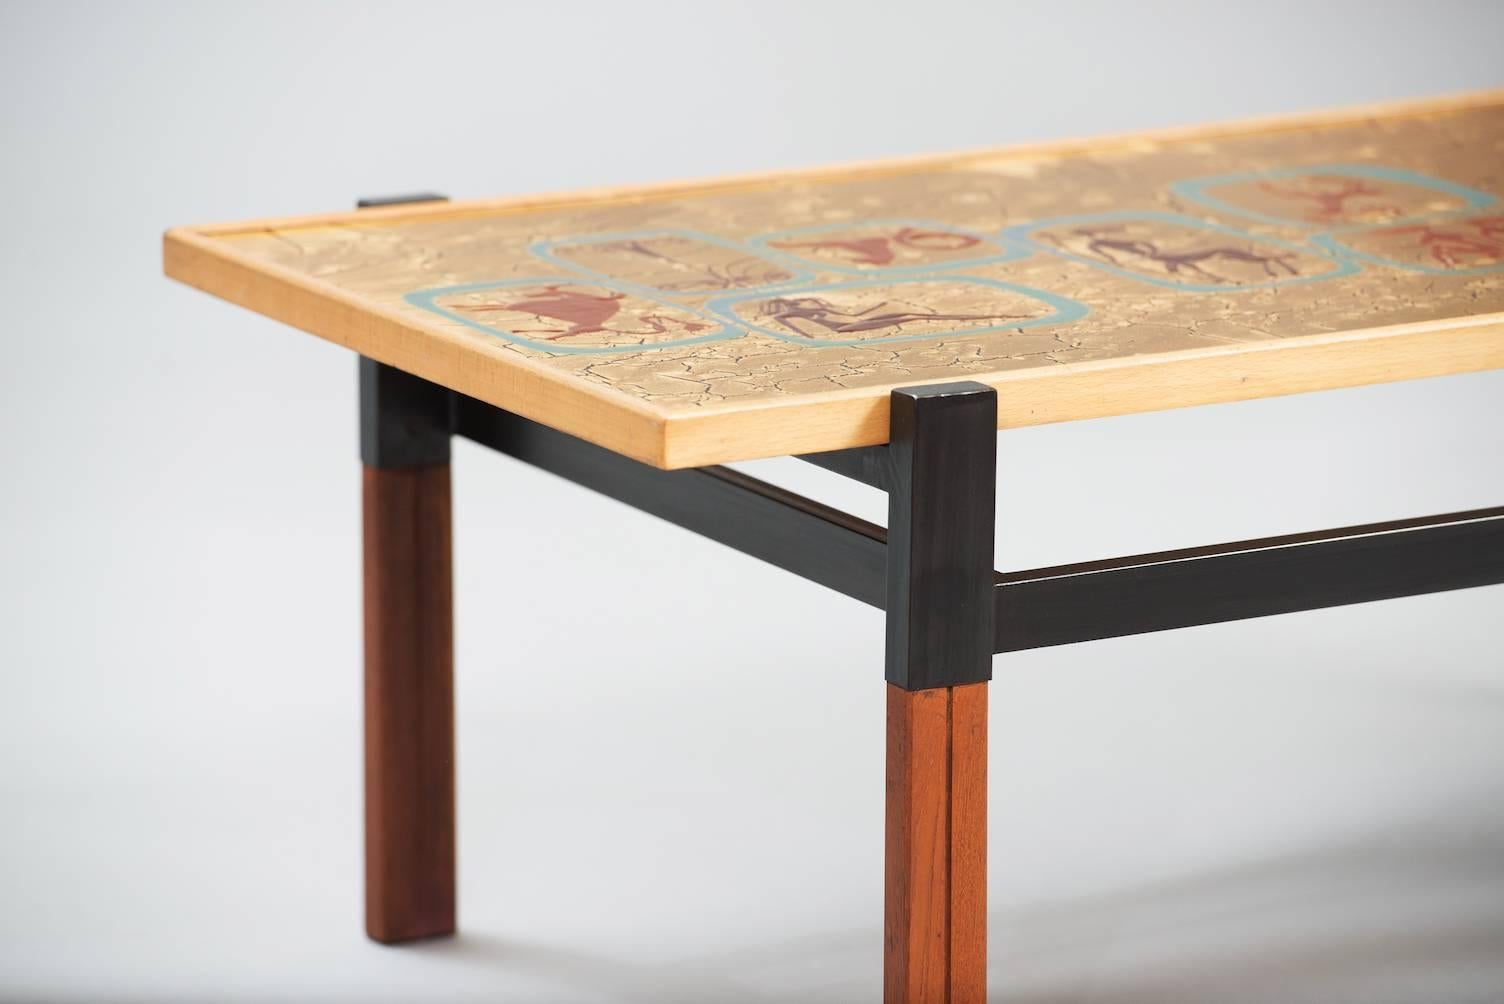 Italian Enameled Top Coffee Table with zodiac signs on top